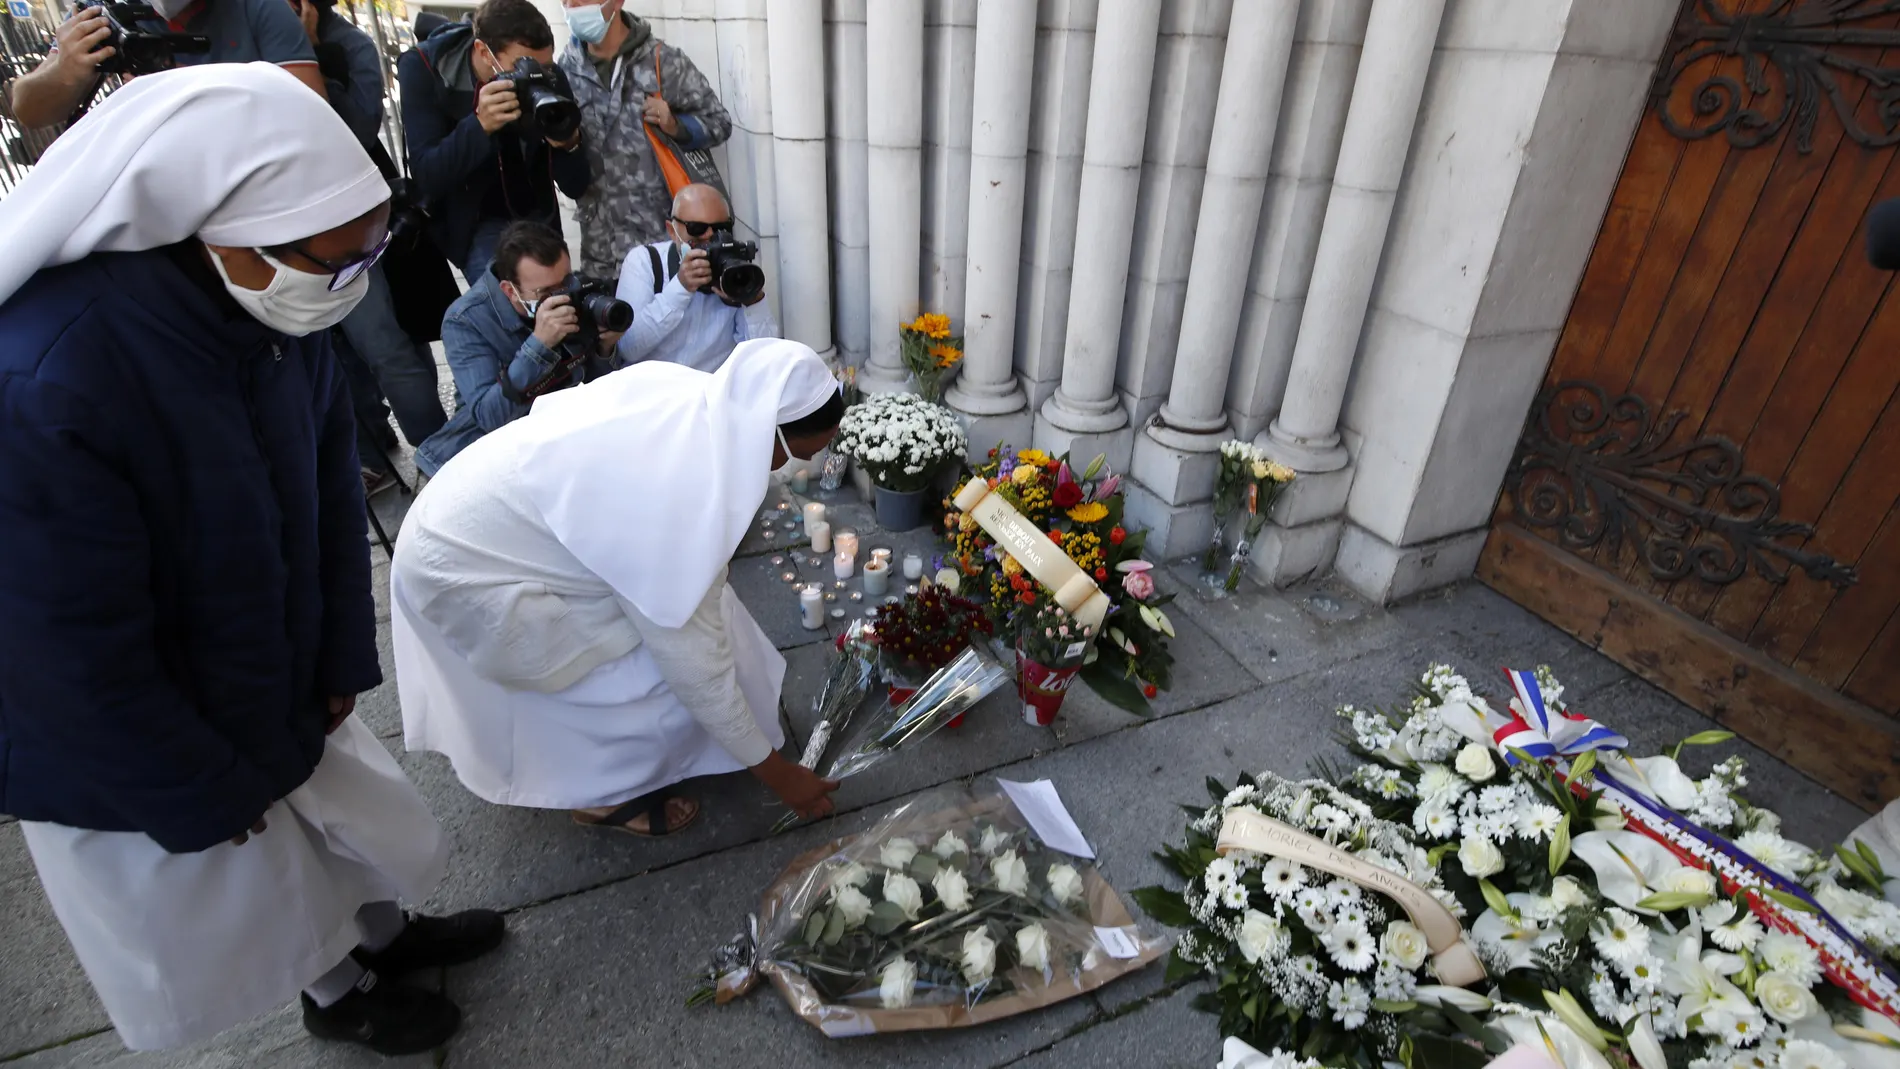 Nice (France), 30/10/2020.- Nuns lay flowers on a makeshift memorial to the victims of the knife attack at the entrance of the Notre Dame Basilica church in Nice, France, 30 October 2020. Three people have died in a terror attack. The attack comes less than a month after the beheading of a French middle school teacher in Paris on 16 October. (Atentado, Francia, Niza) EFE/EPA/SEBASTIEN NOGIER